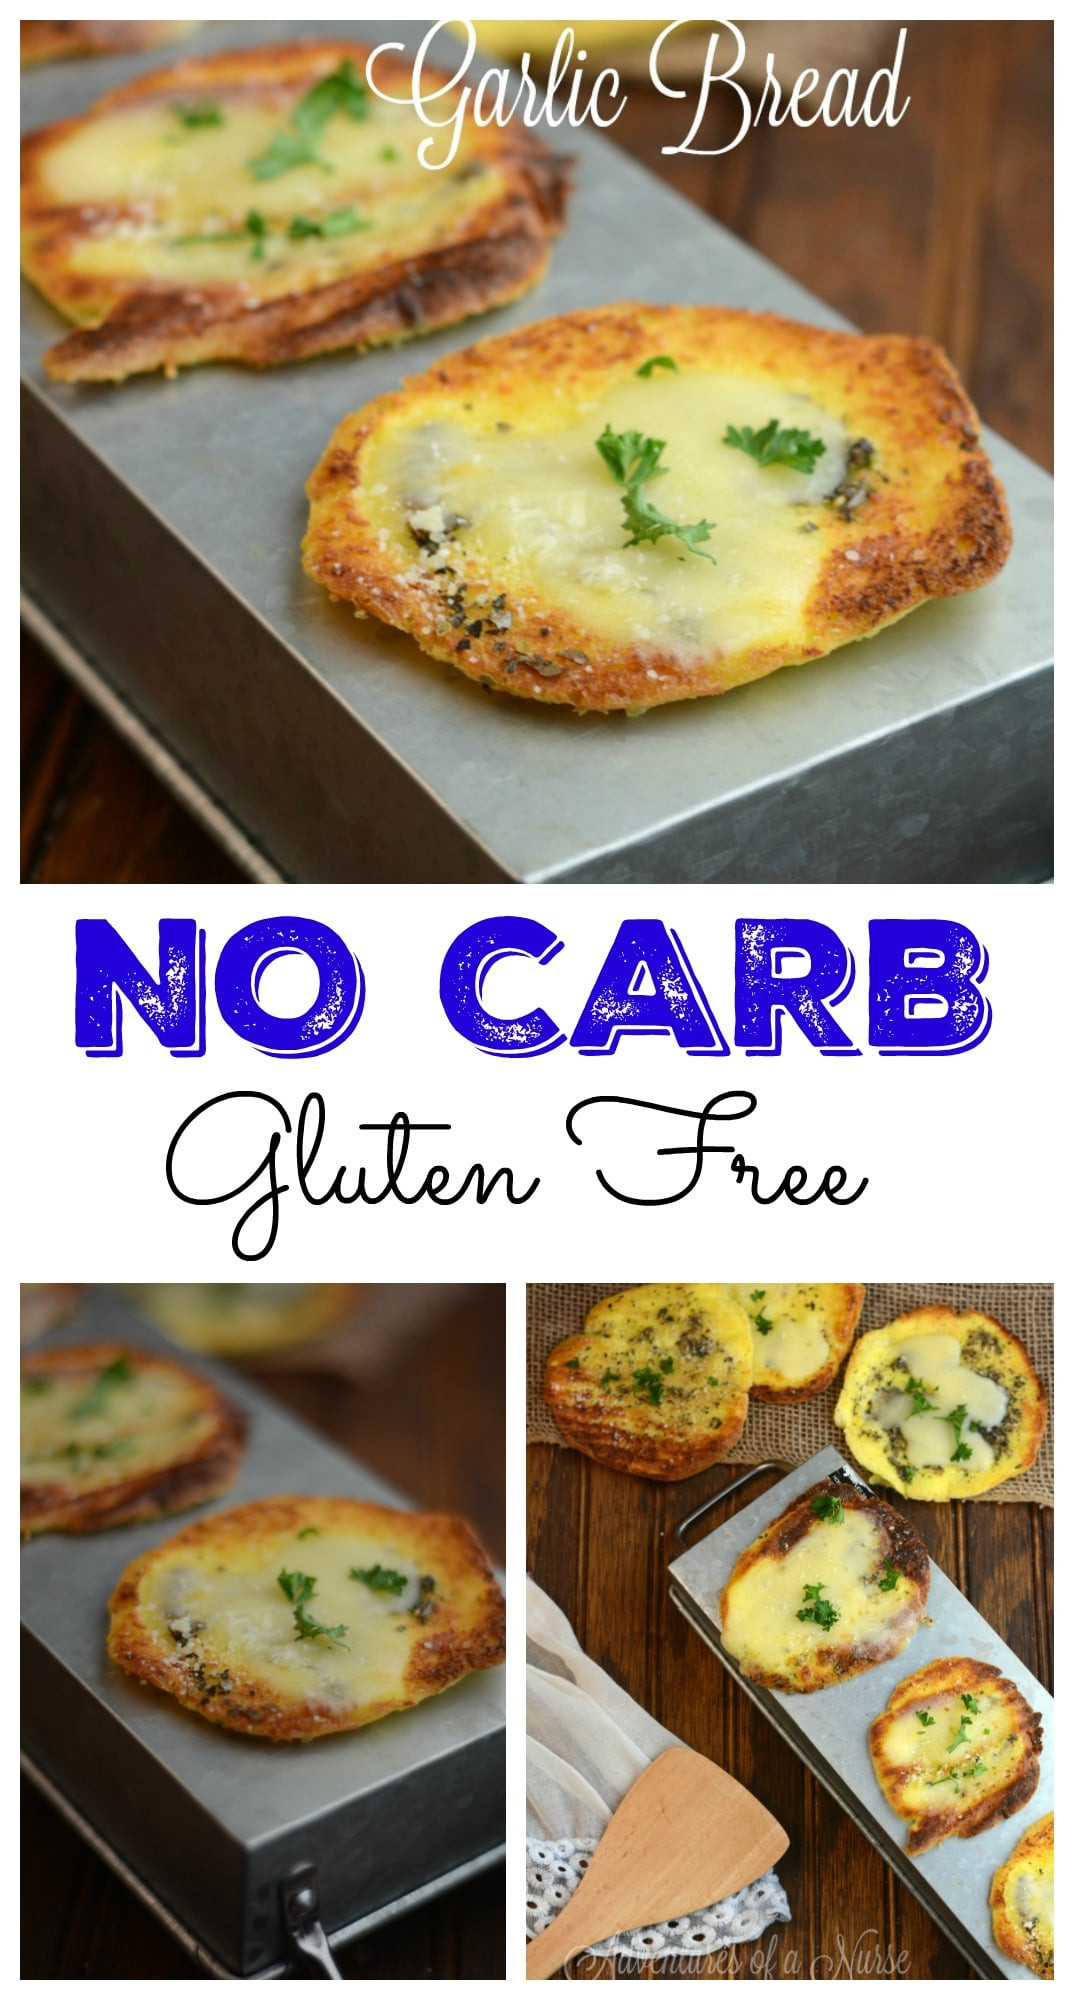 Carbohydrate Free Bread
 Carb Free Gluten Free Garlic Bread